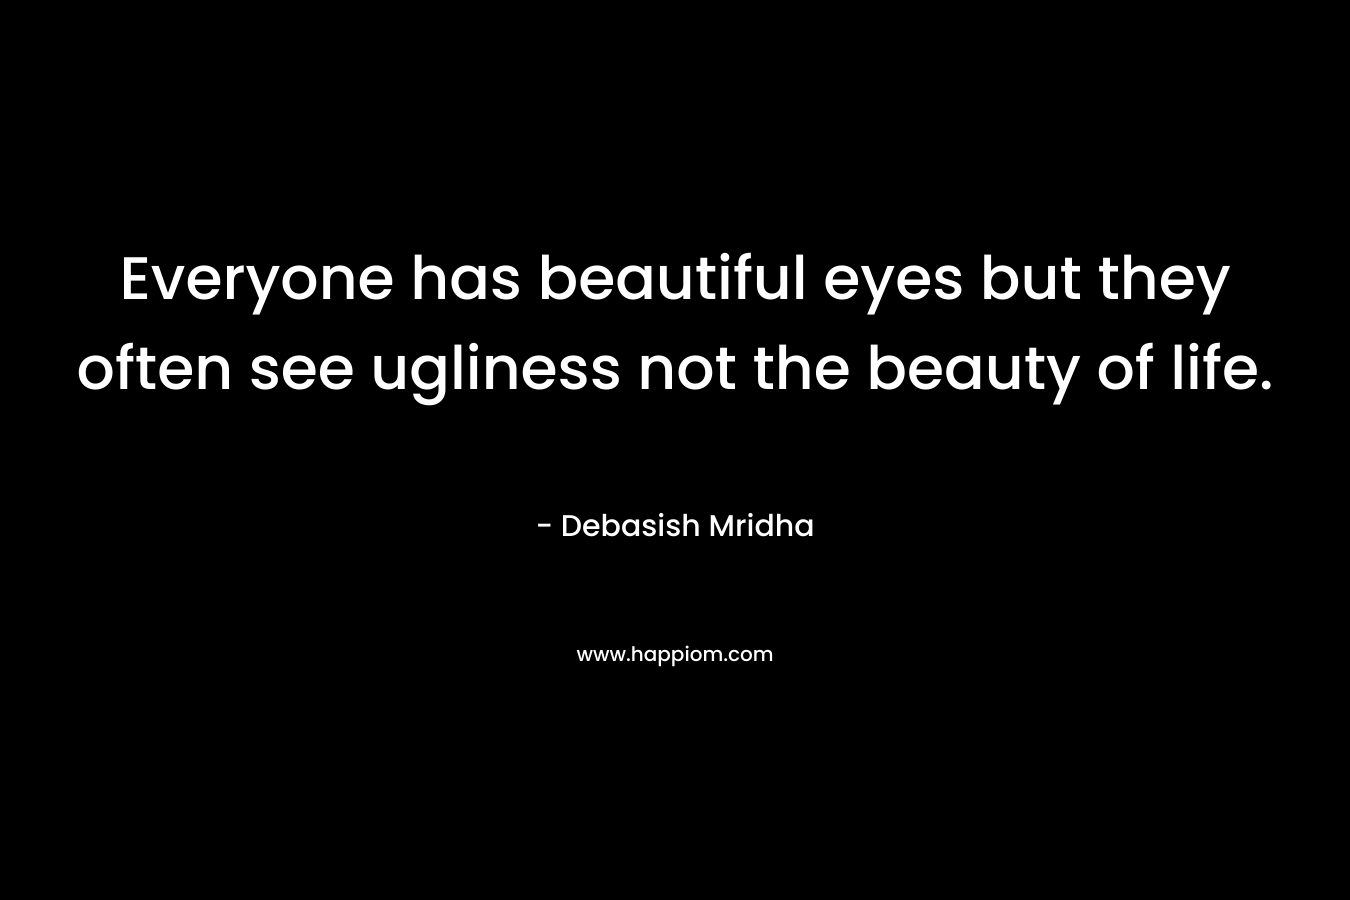 Everyone has beautiful eyes but they often see ugliness not the beauty of life. – Debasish Mridha